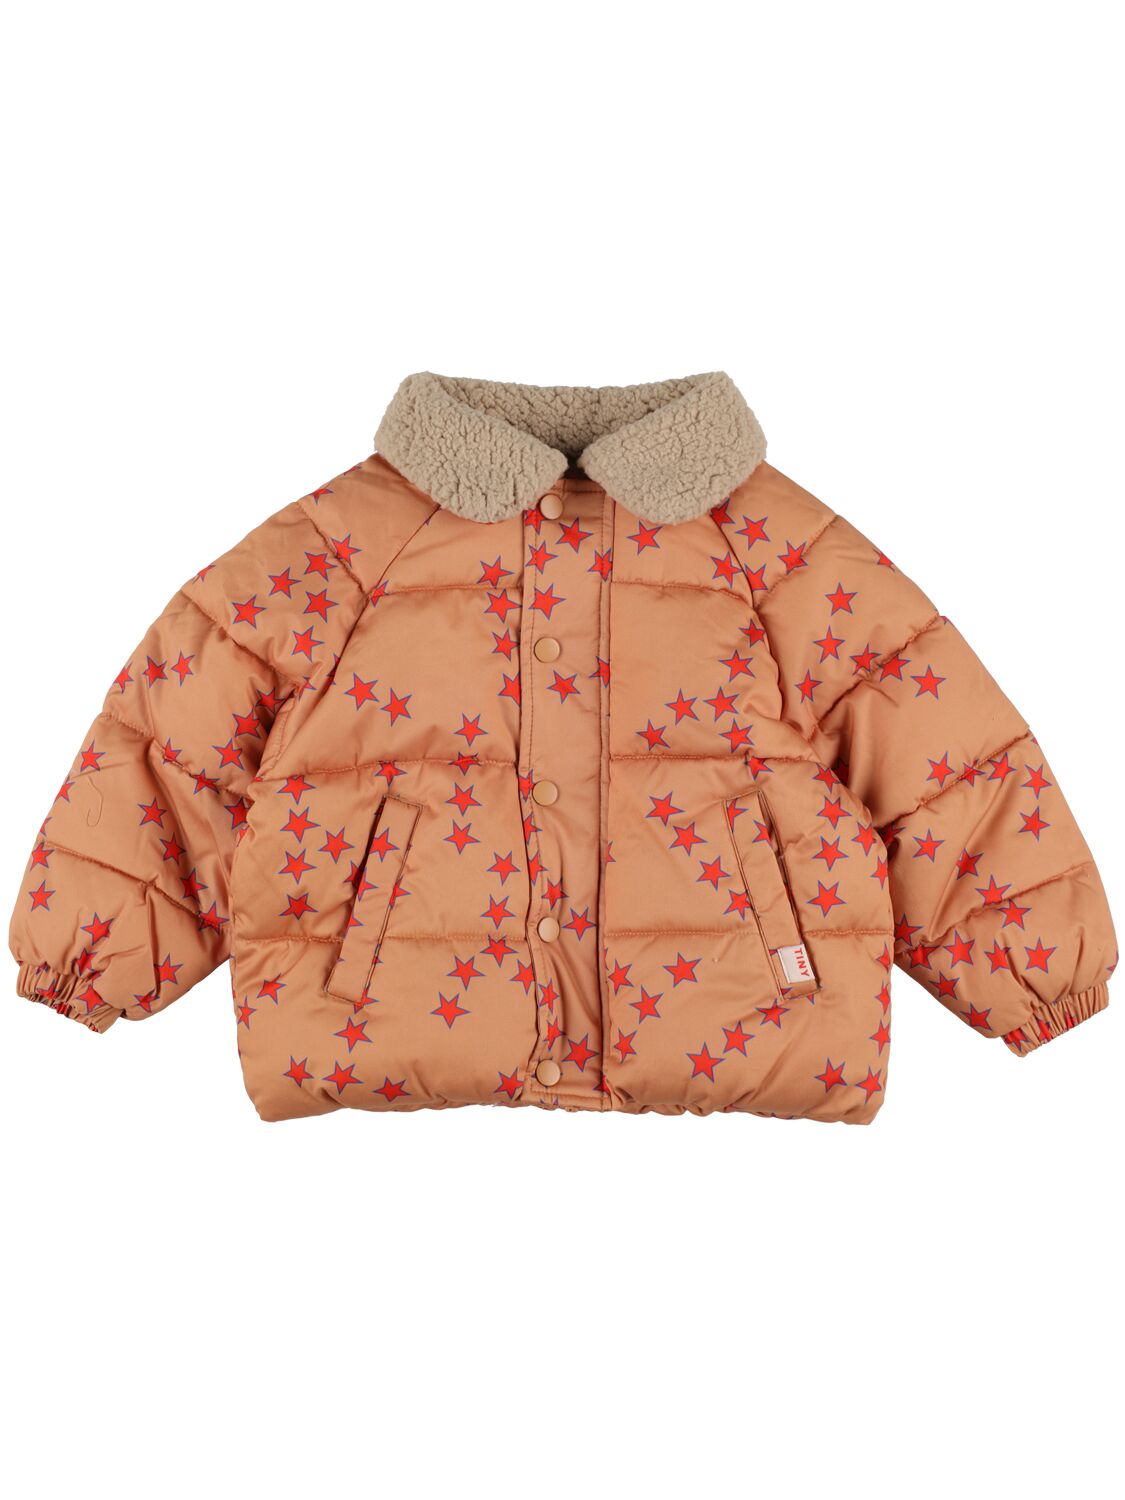 Tiny Cottons Kids' Star Print Nylon Puffer Jacket In Light Brown